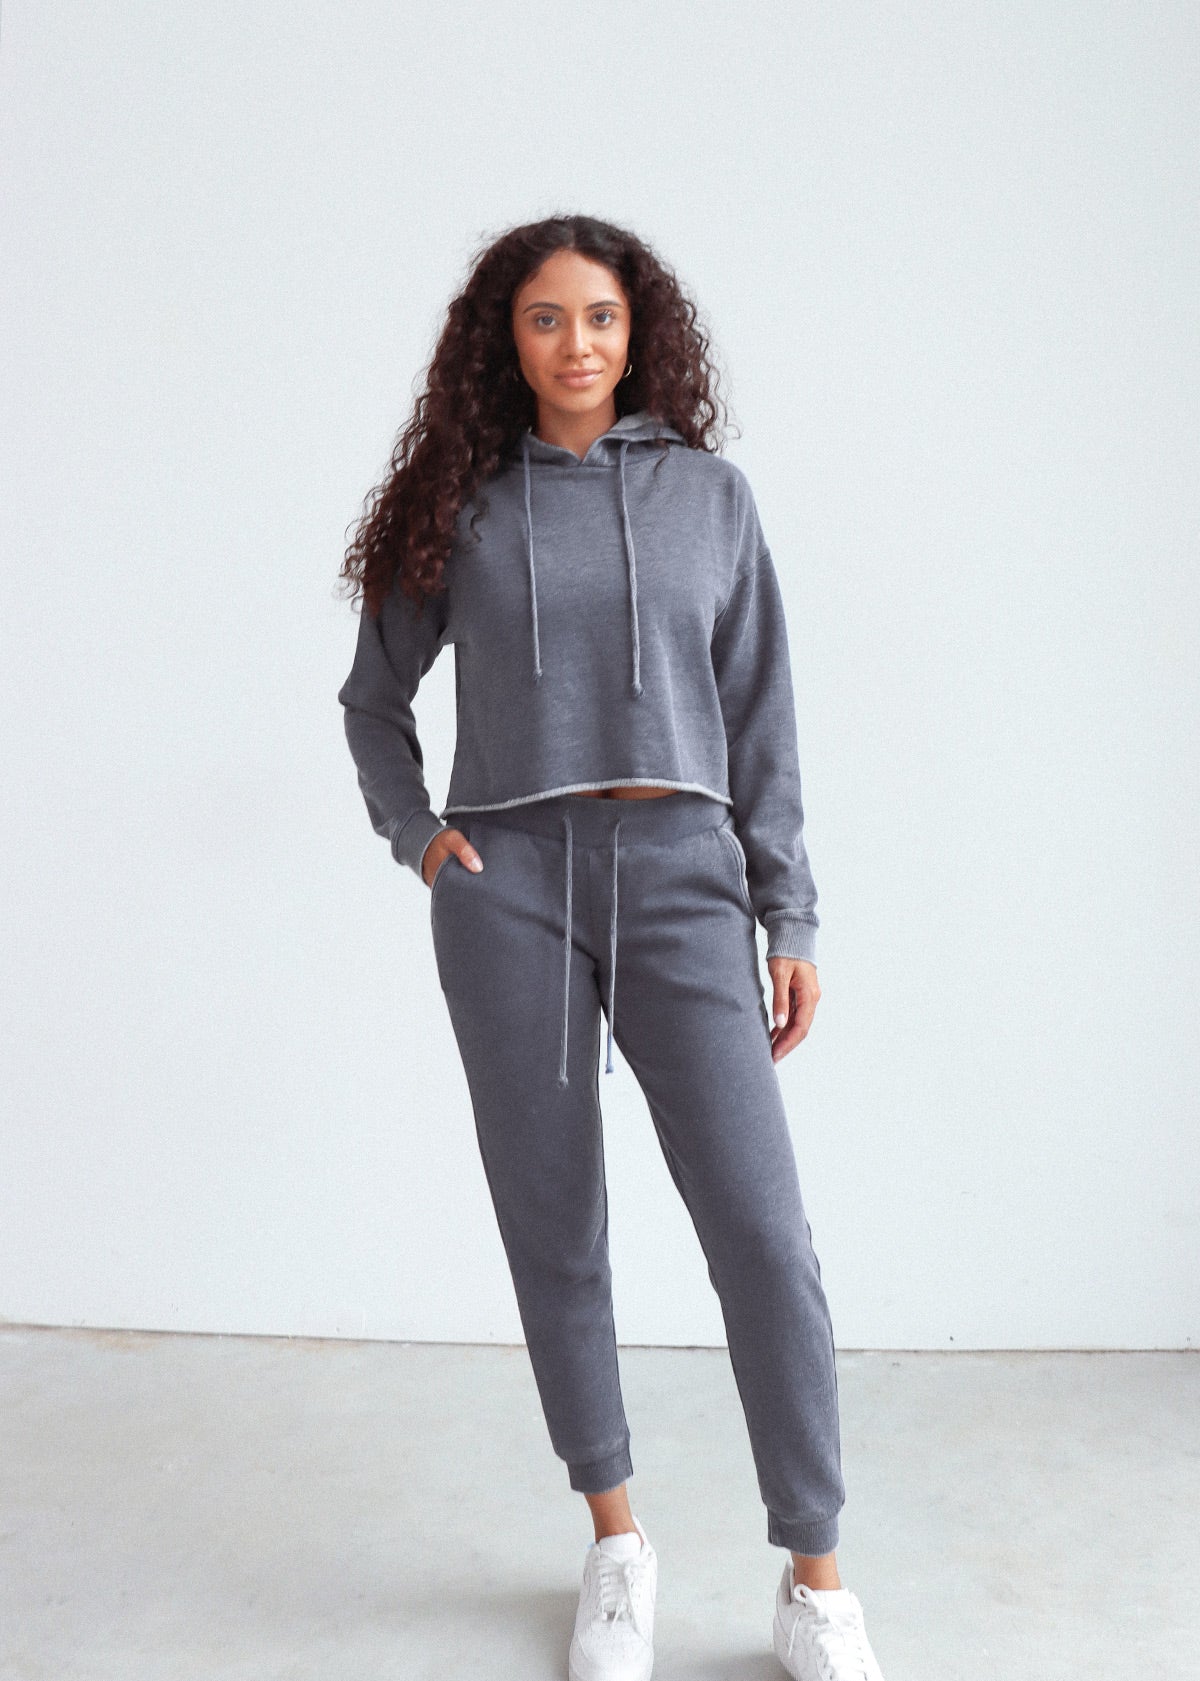 The Burnout Cropped Hoodie + Jogger Set